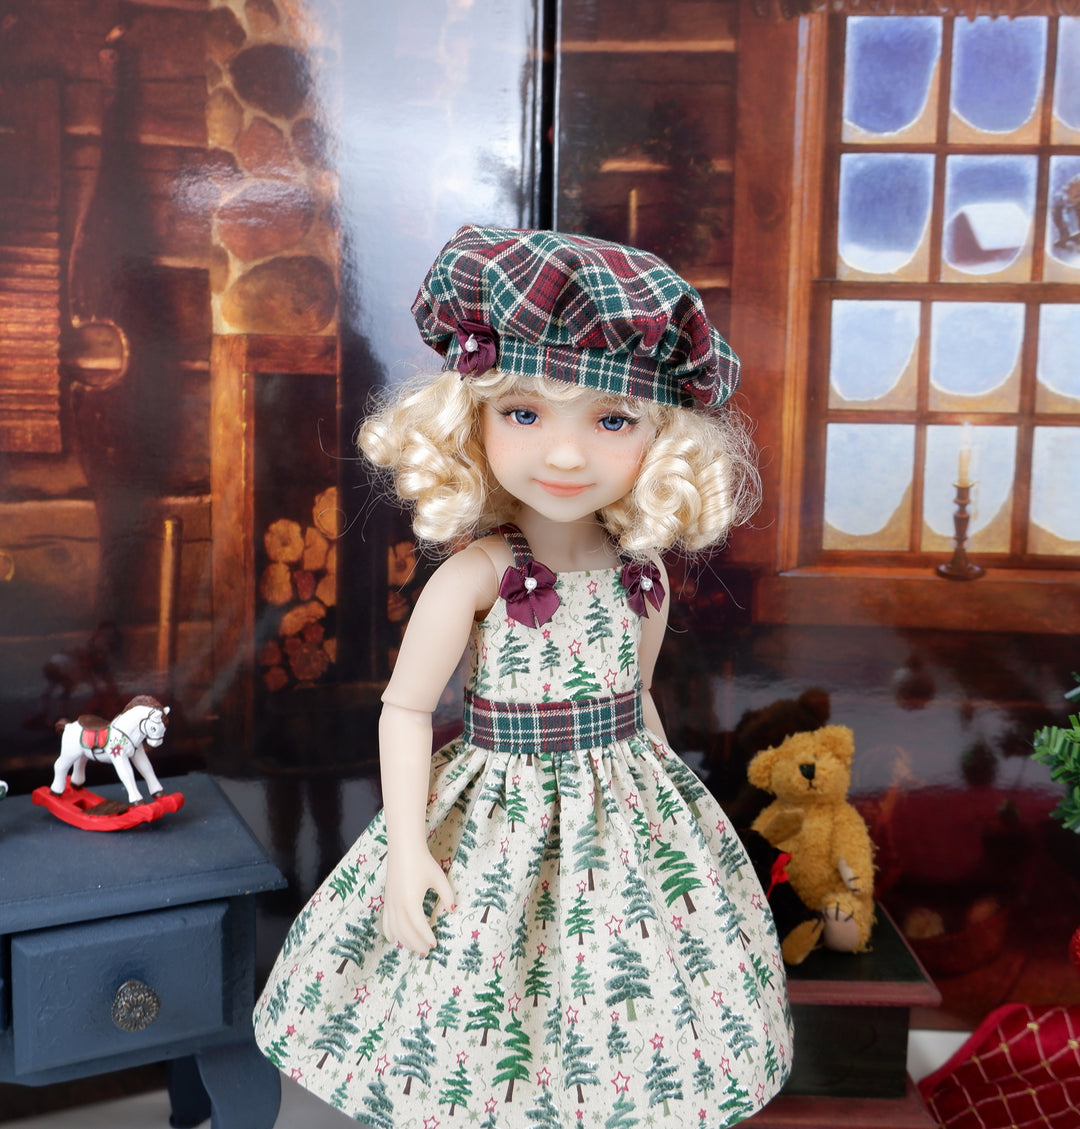 Log Cabin Christmas - dress with shoes for Ruby Red Fashion Friends doll